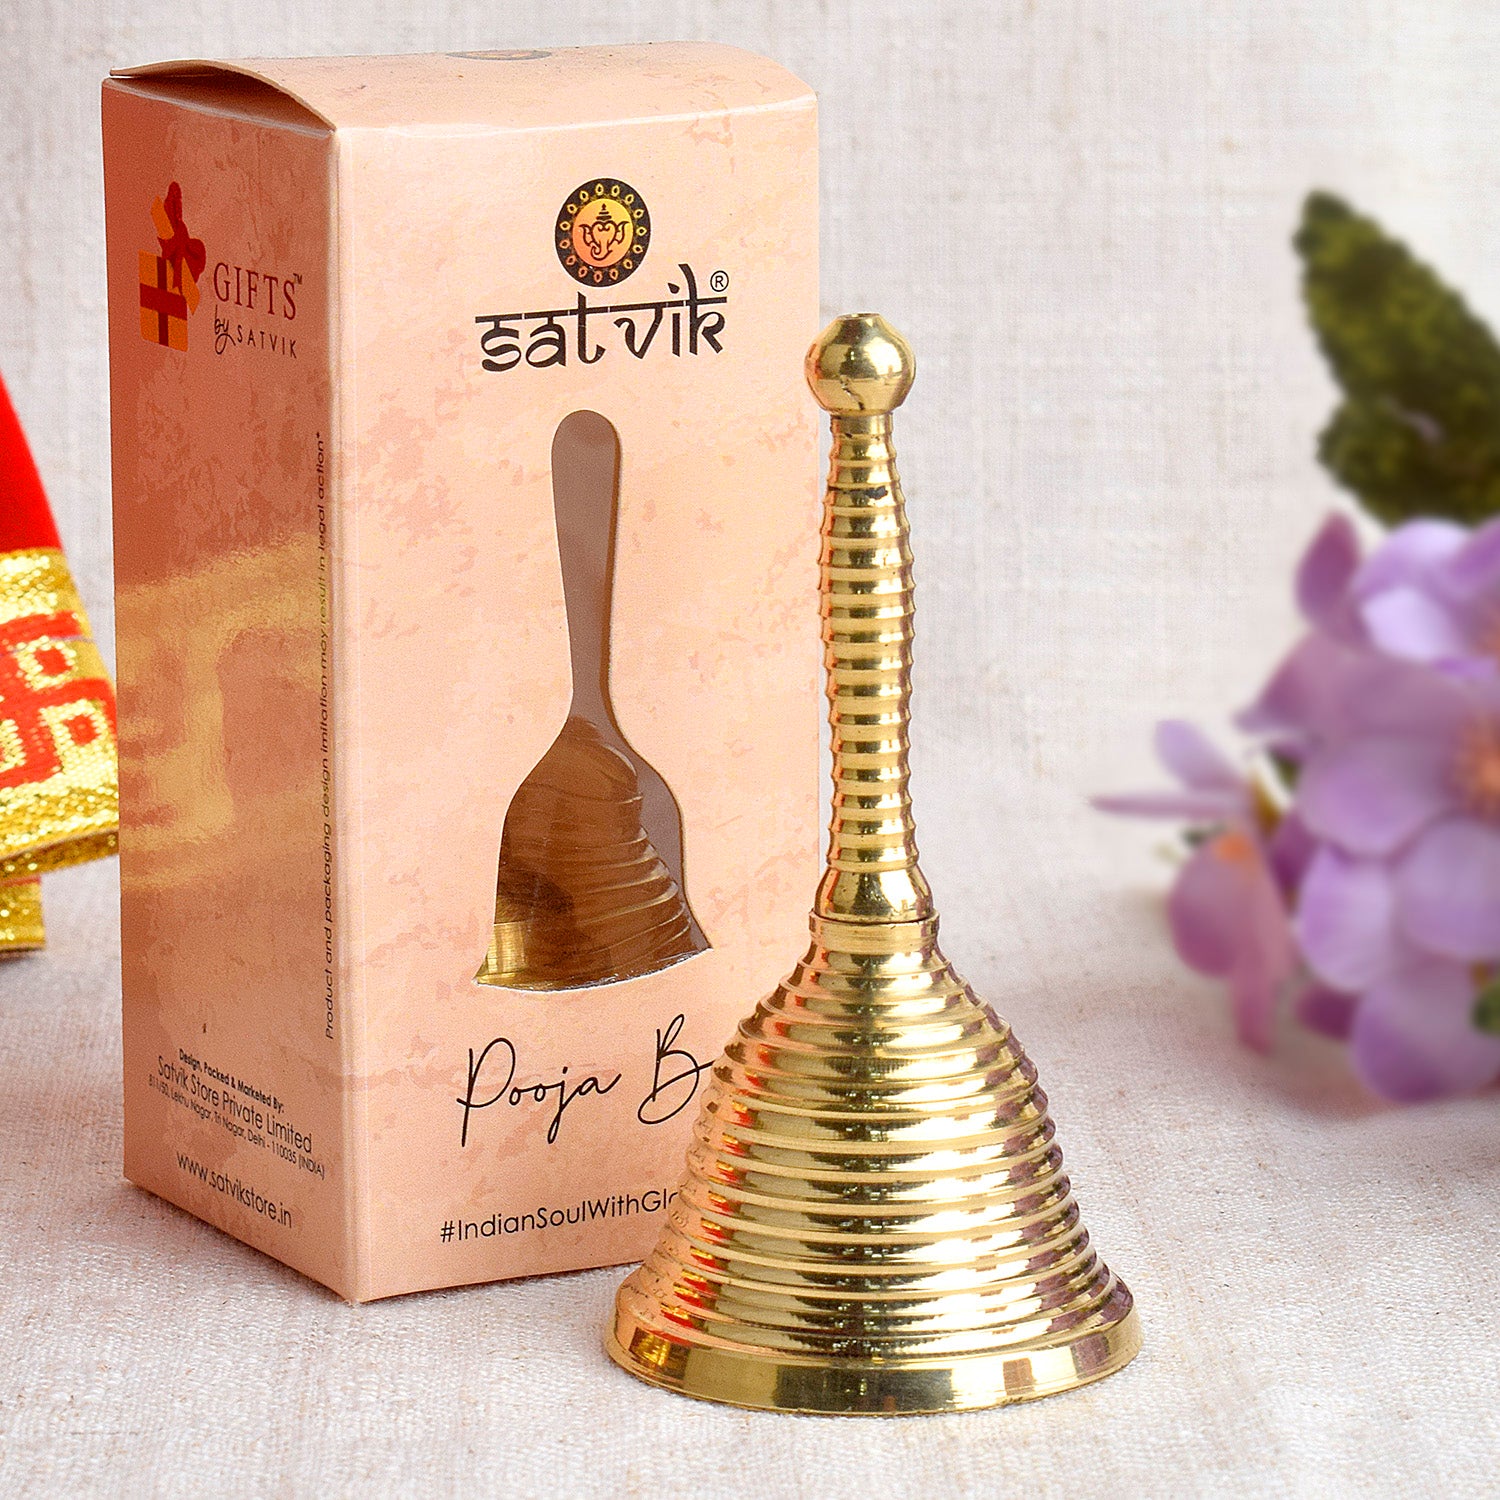 Small Brass Temple Pooja Bells Of Different Sizes Customization Available  at Rs 45/piece, Brass Temple Bell in Hyderabad